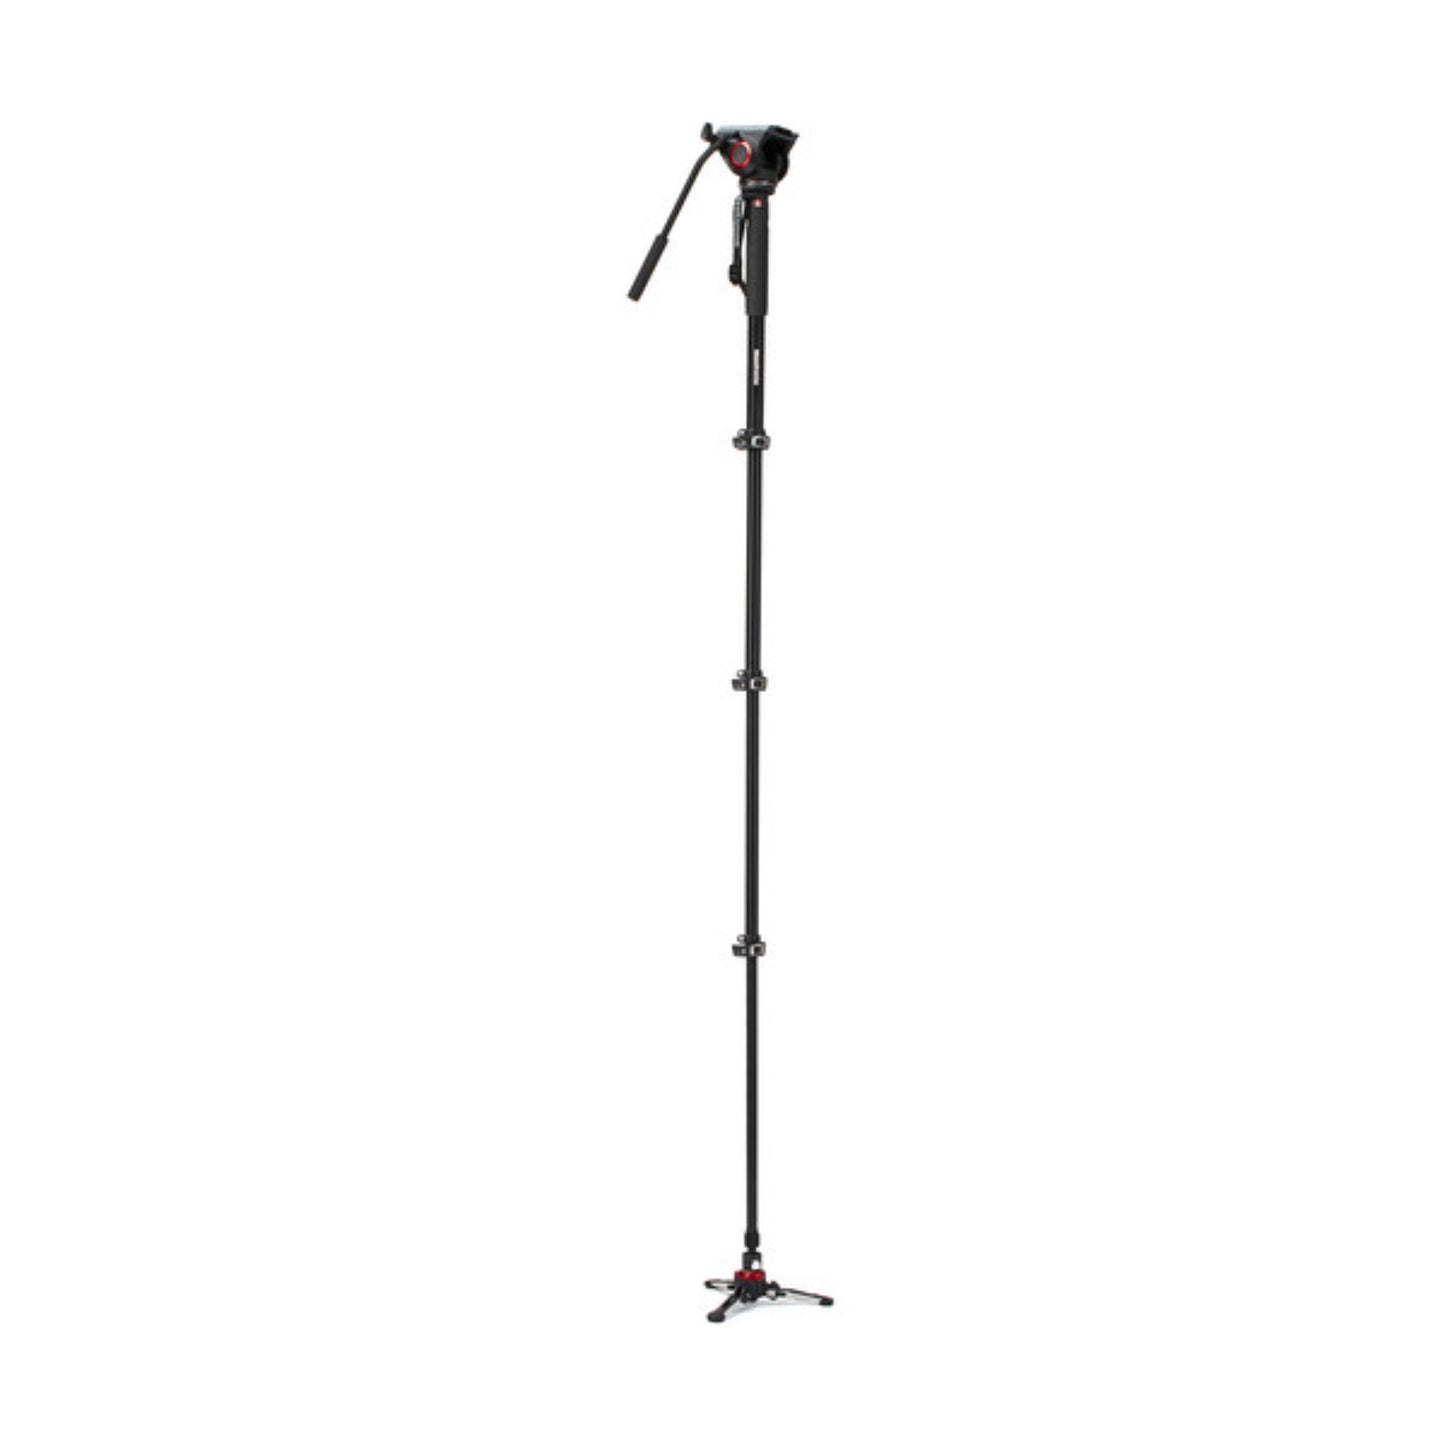 Manfrotto monopod with video head for hire